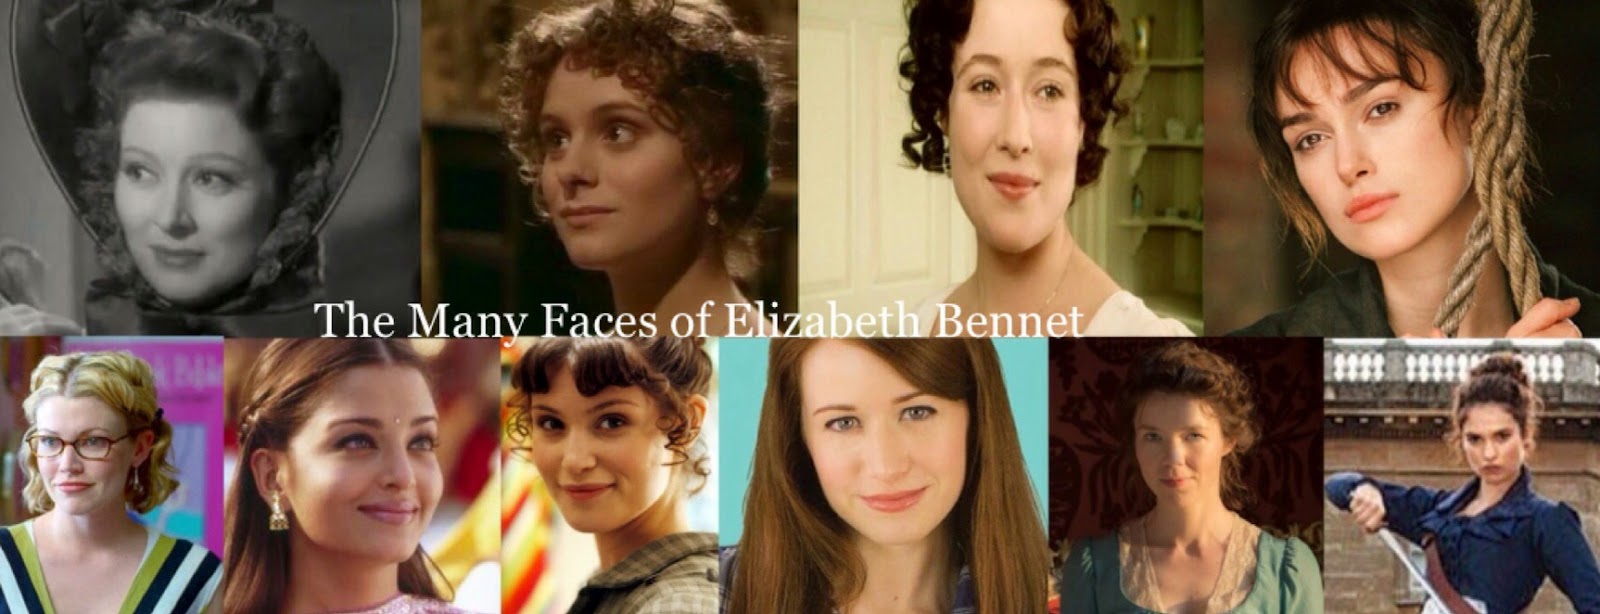 Then & Now: The Many Faces of Elizabeth Bennet (Part 5)